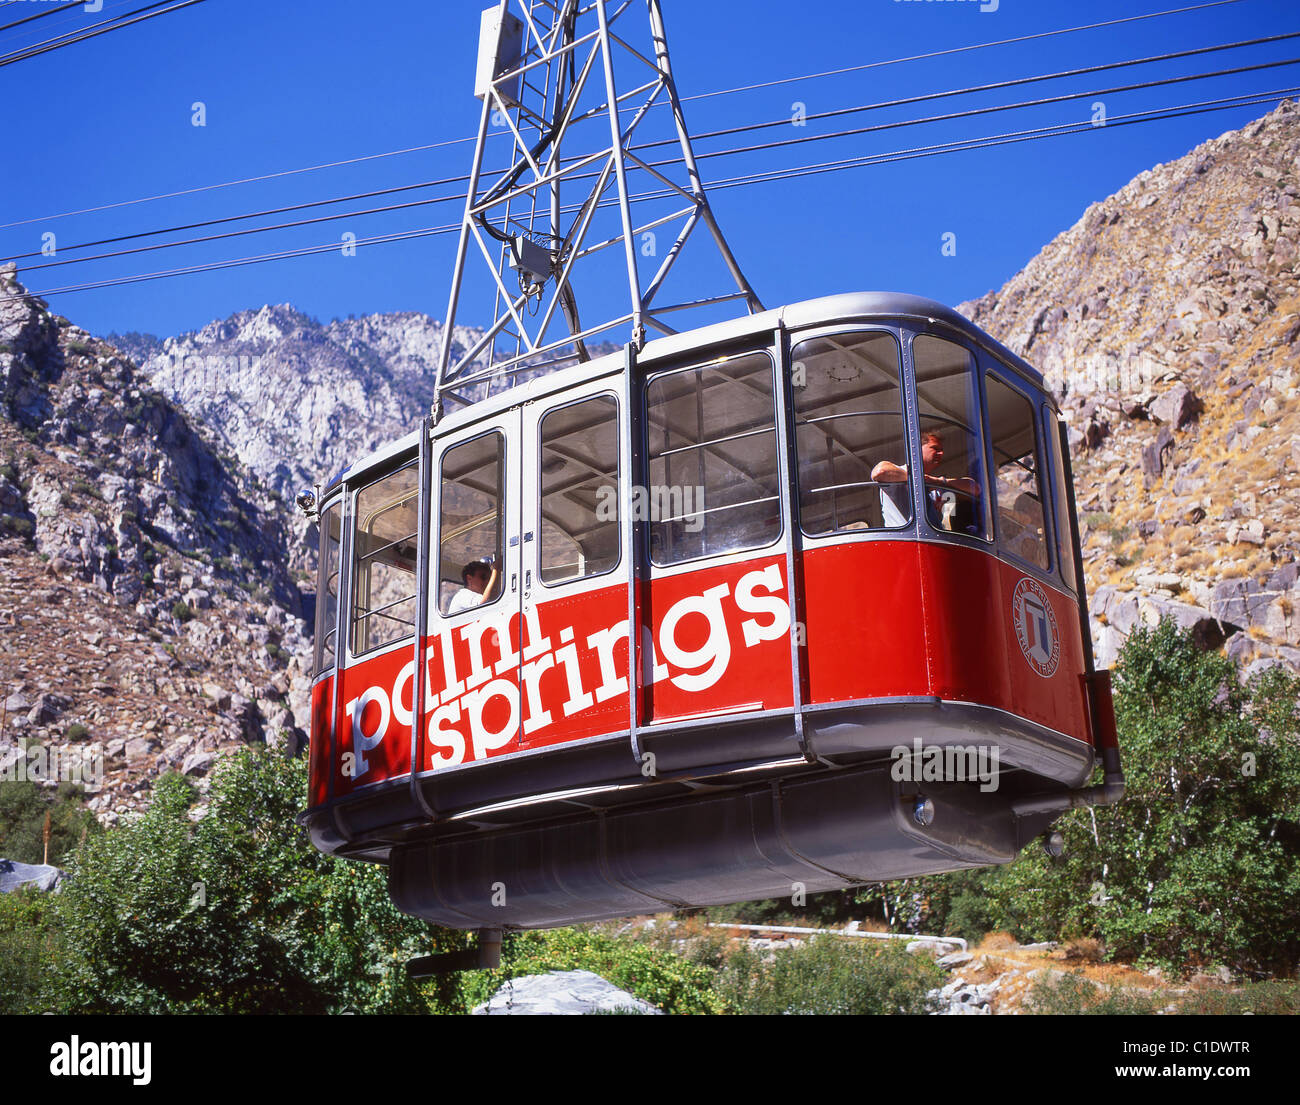 Palm Springs Tramway, Palm Springs, California, United States of America Stock Photo